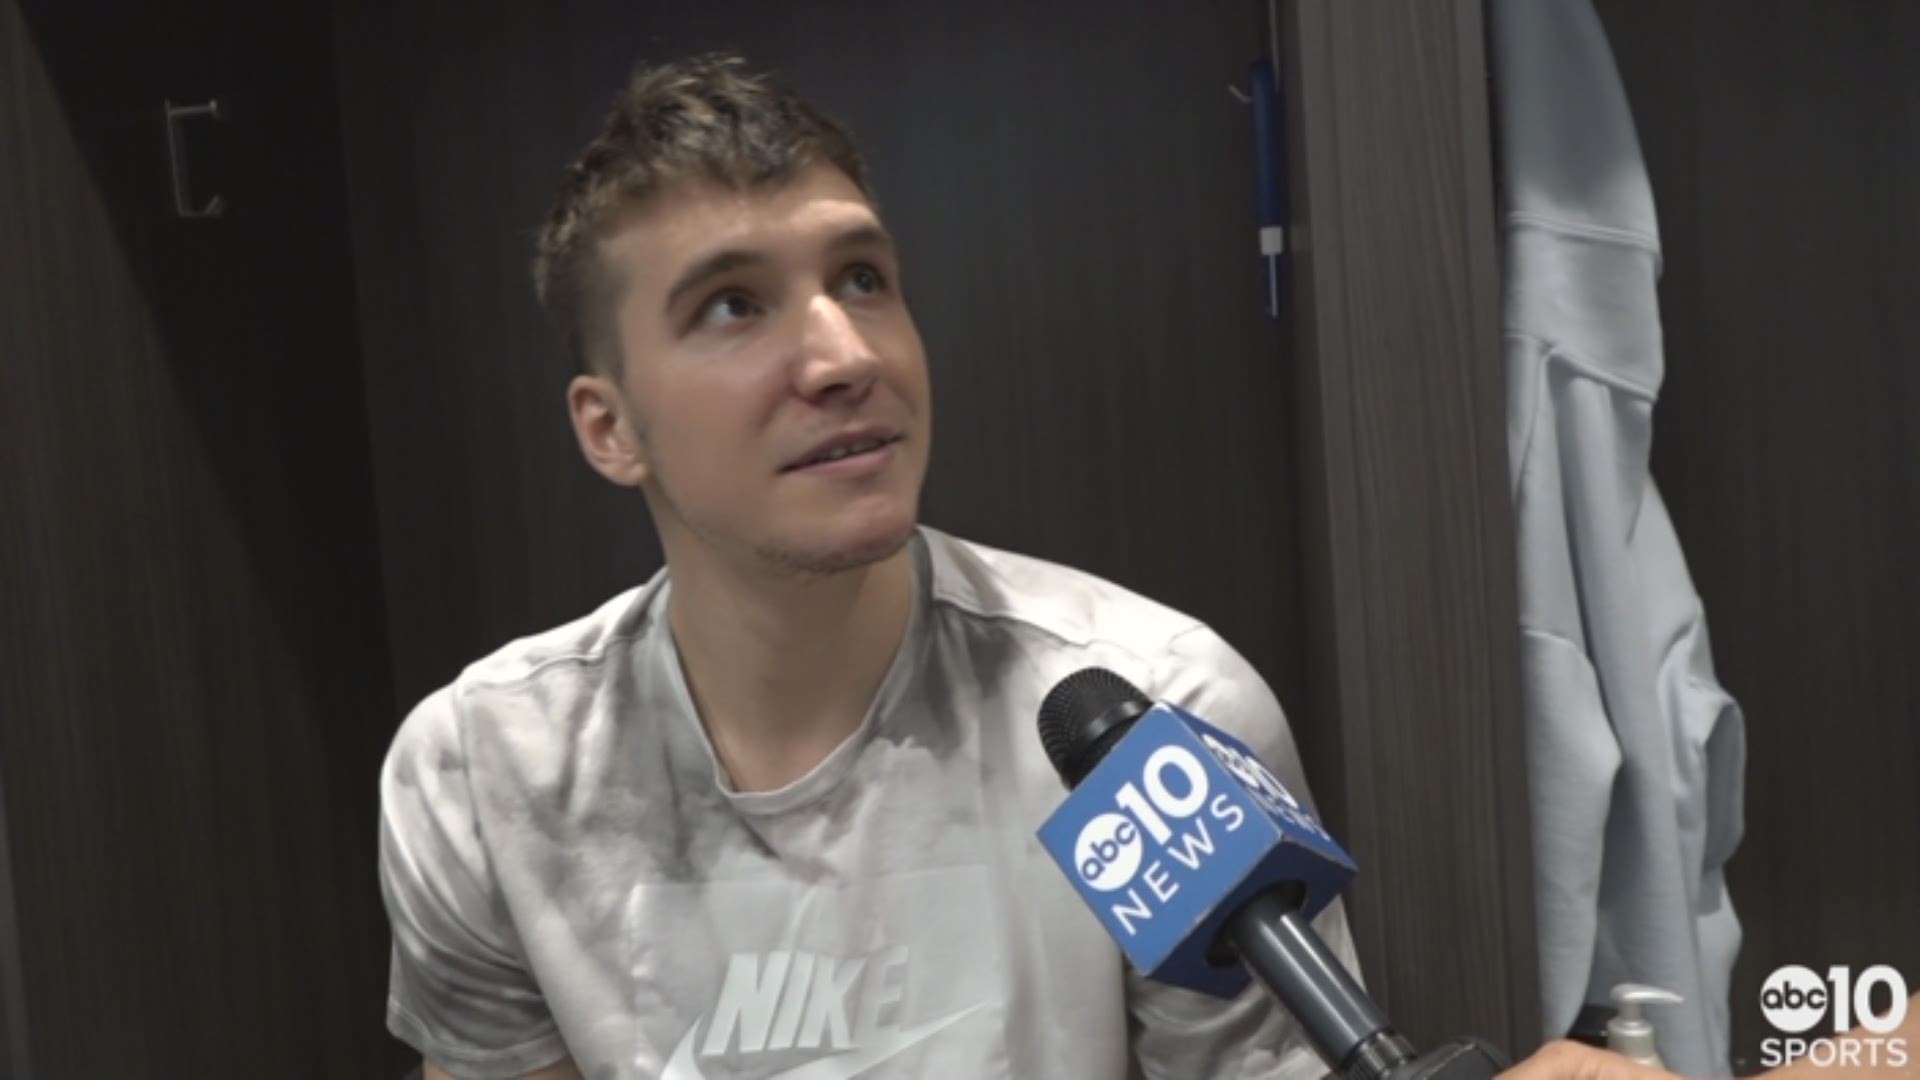 Kings guard Bogdan Bogdanovic talks about his team improving their fast paced offense in practice, how that carried over into Wednesday's win in Sacramento over the Atlanta Hawks and compares Harry Giles to Chris Webber and Draymond Green.